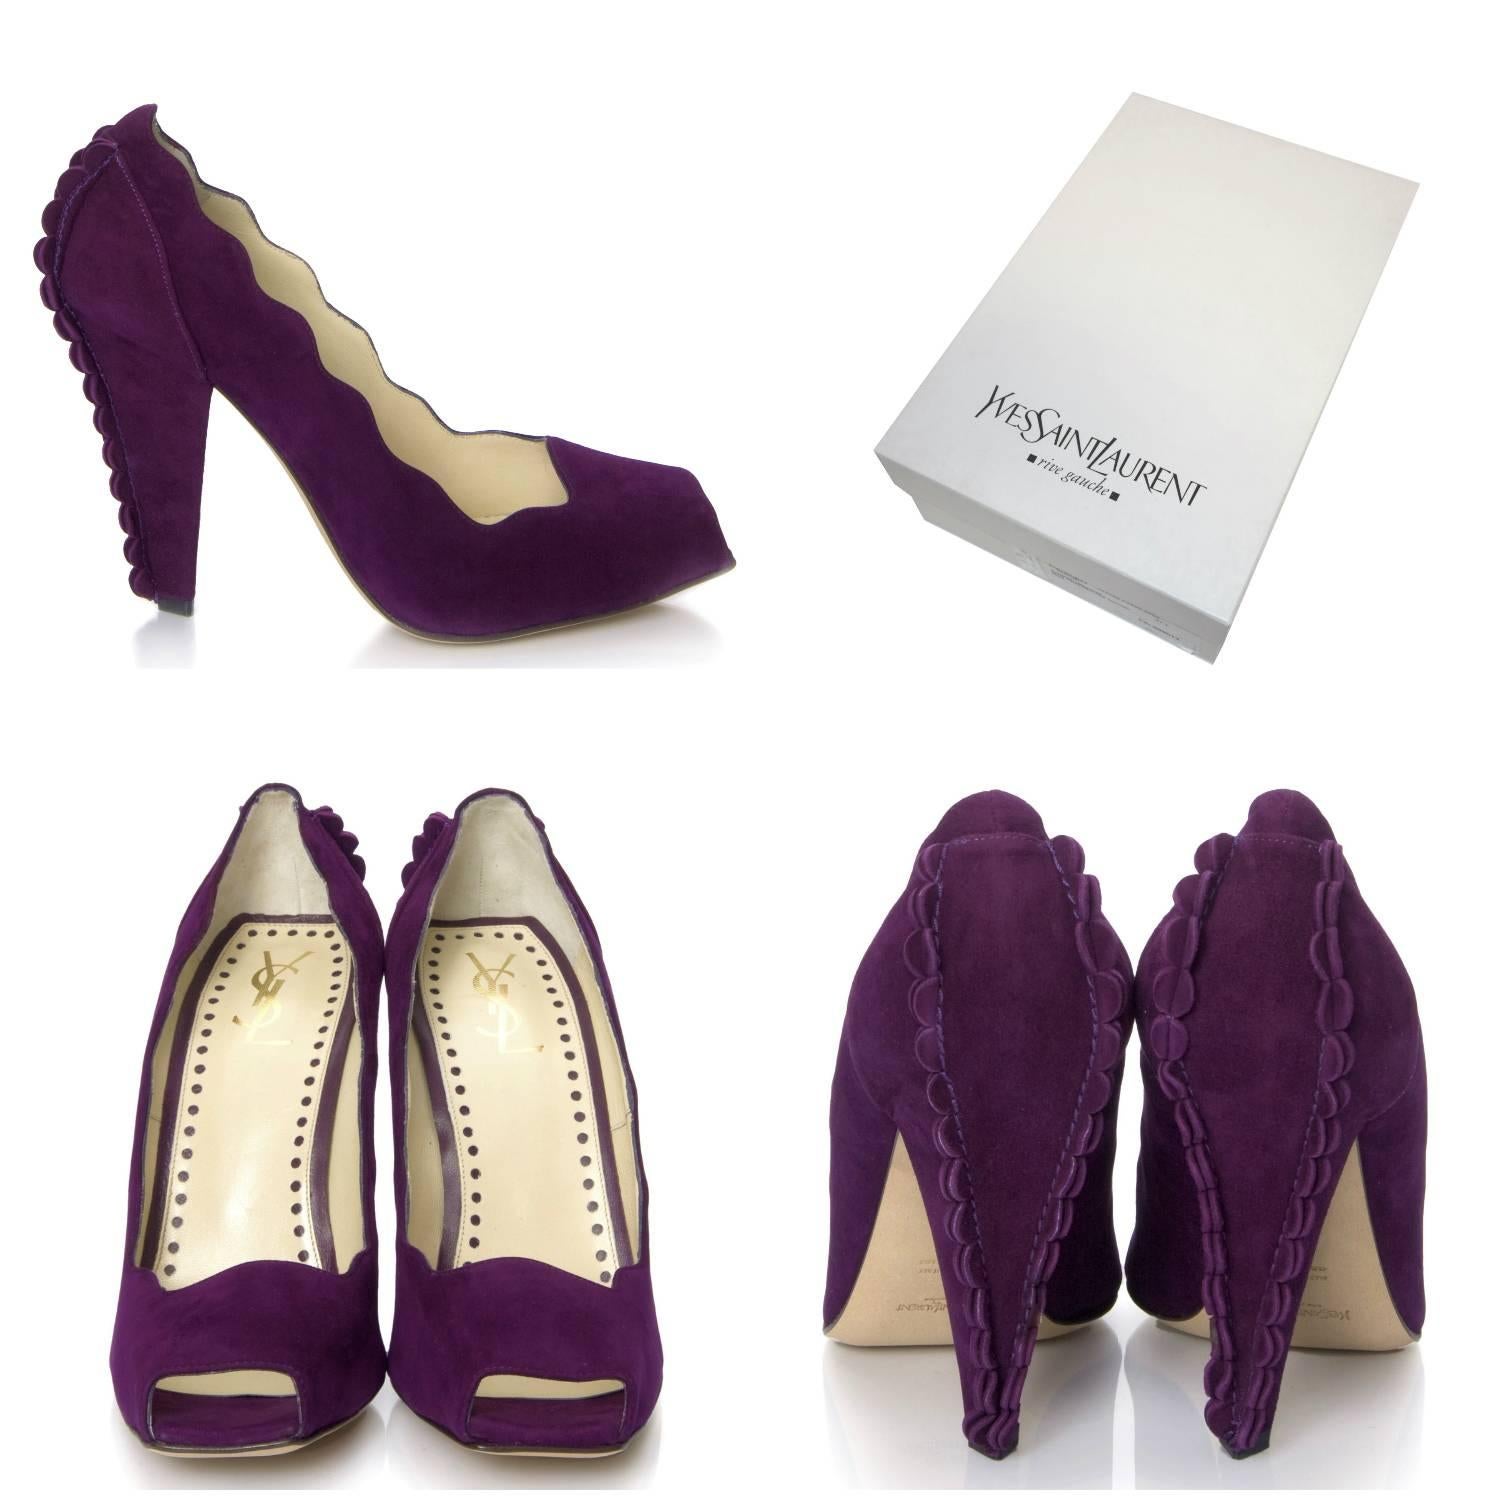 Tom Ford For YSL Heels
Brand New
* Stunning Suede In Purple
* Tom Ford's Final Years w/ YSL
* Iconic and Impossible to Find New
* Unique Scalloped Sides & Heel
* Leather Insole 
* Open Square Toe 
* 4.5